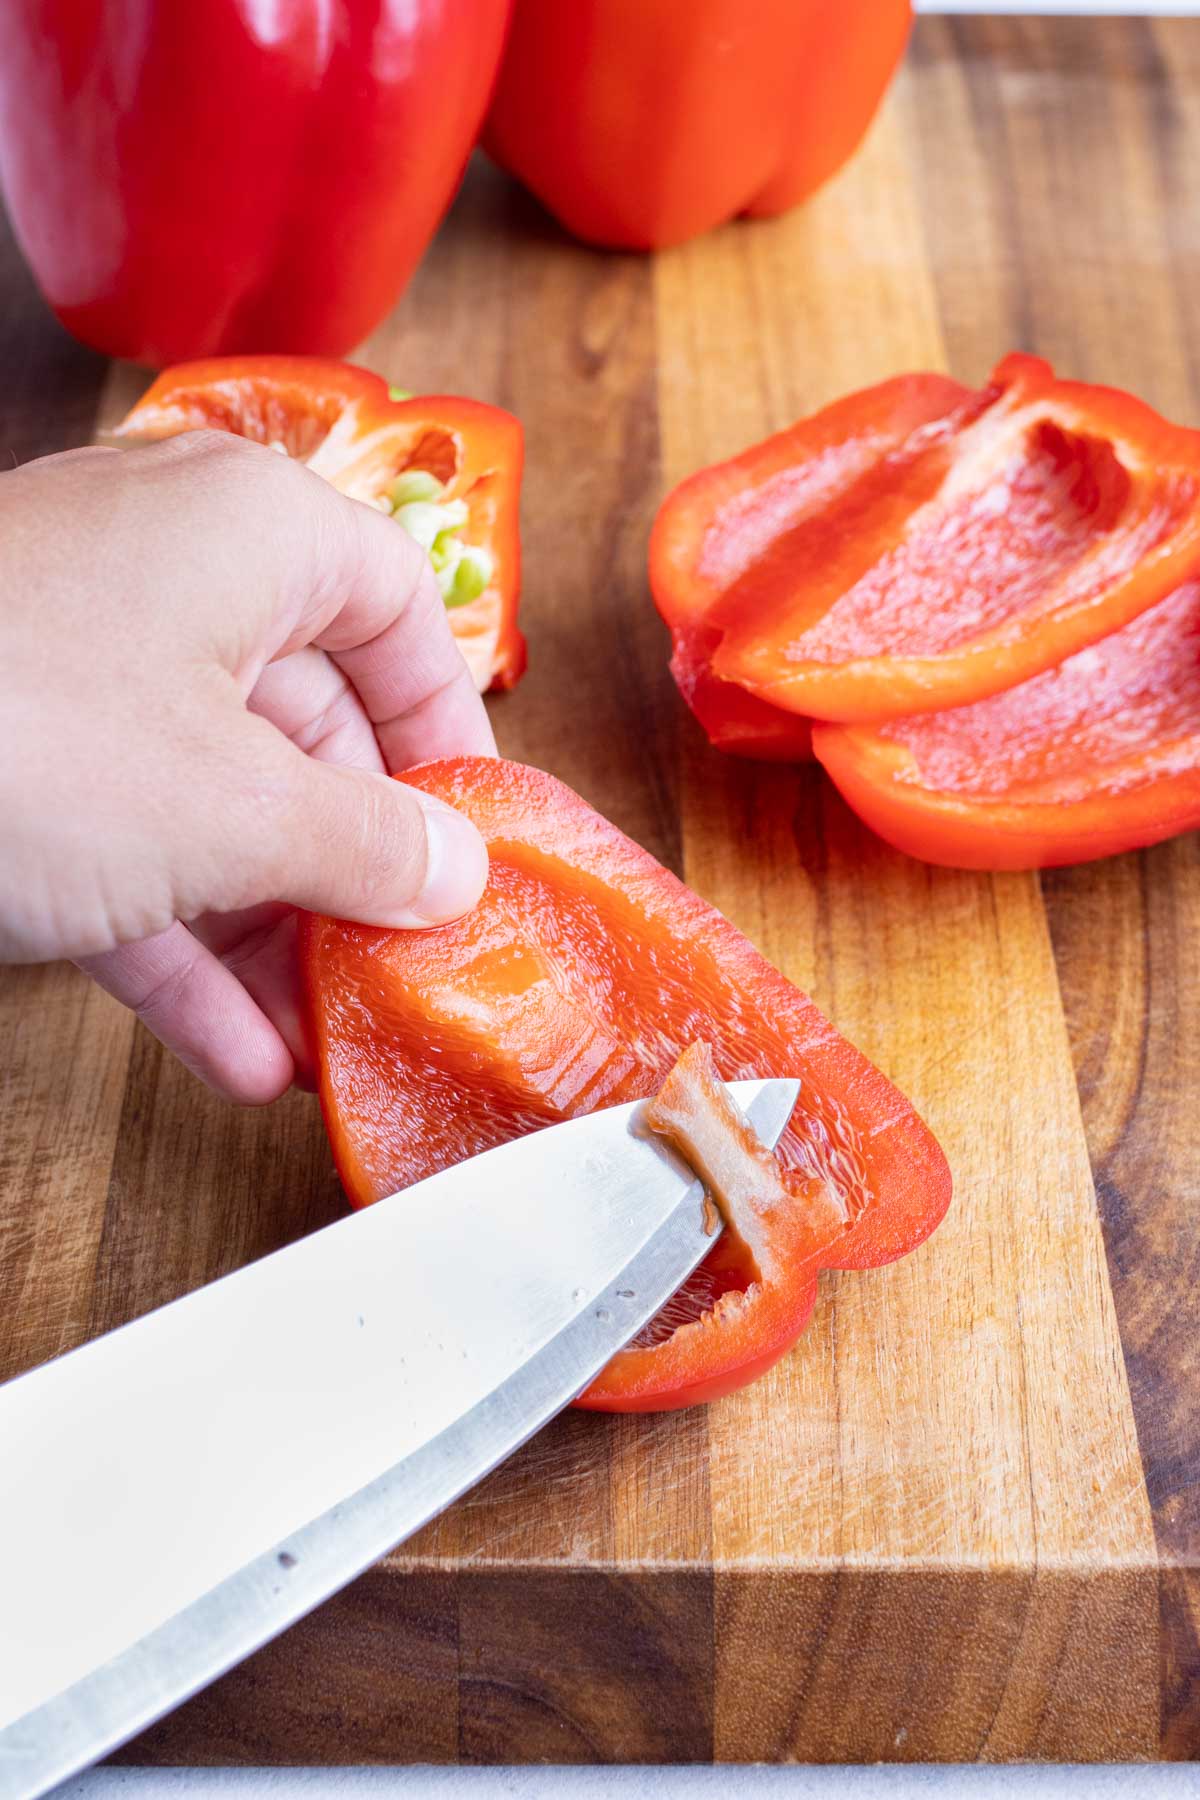 A knife removes the membrane and seeds of a pepper.